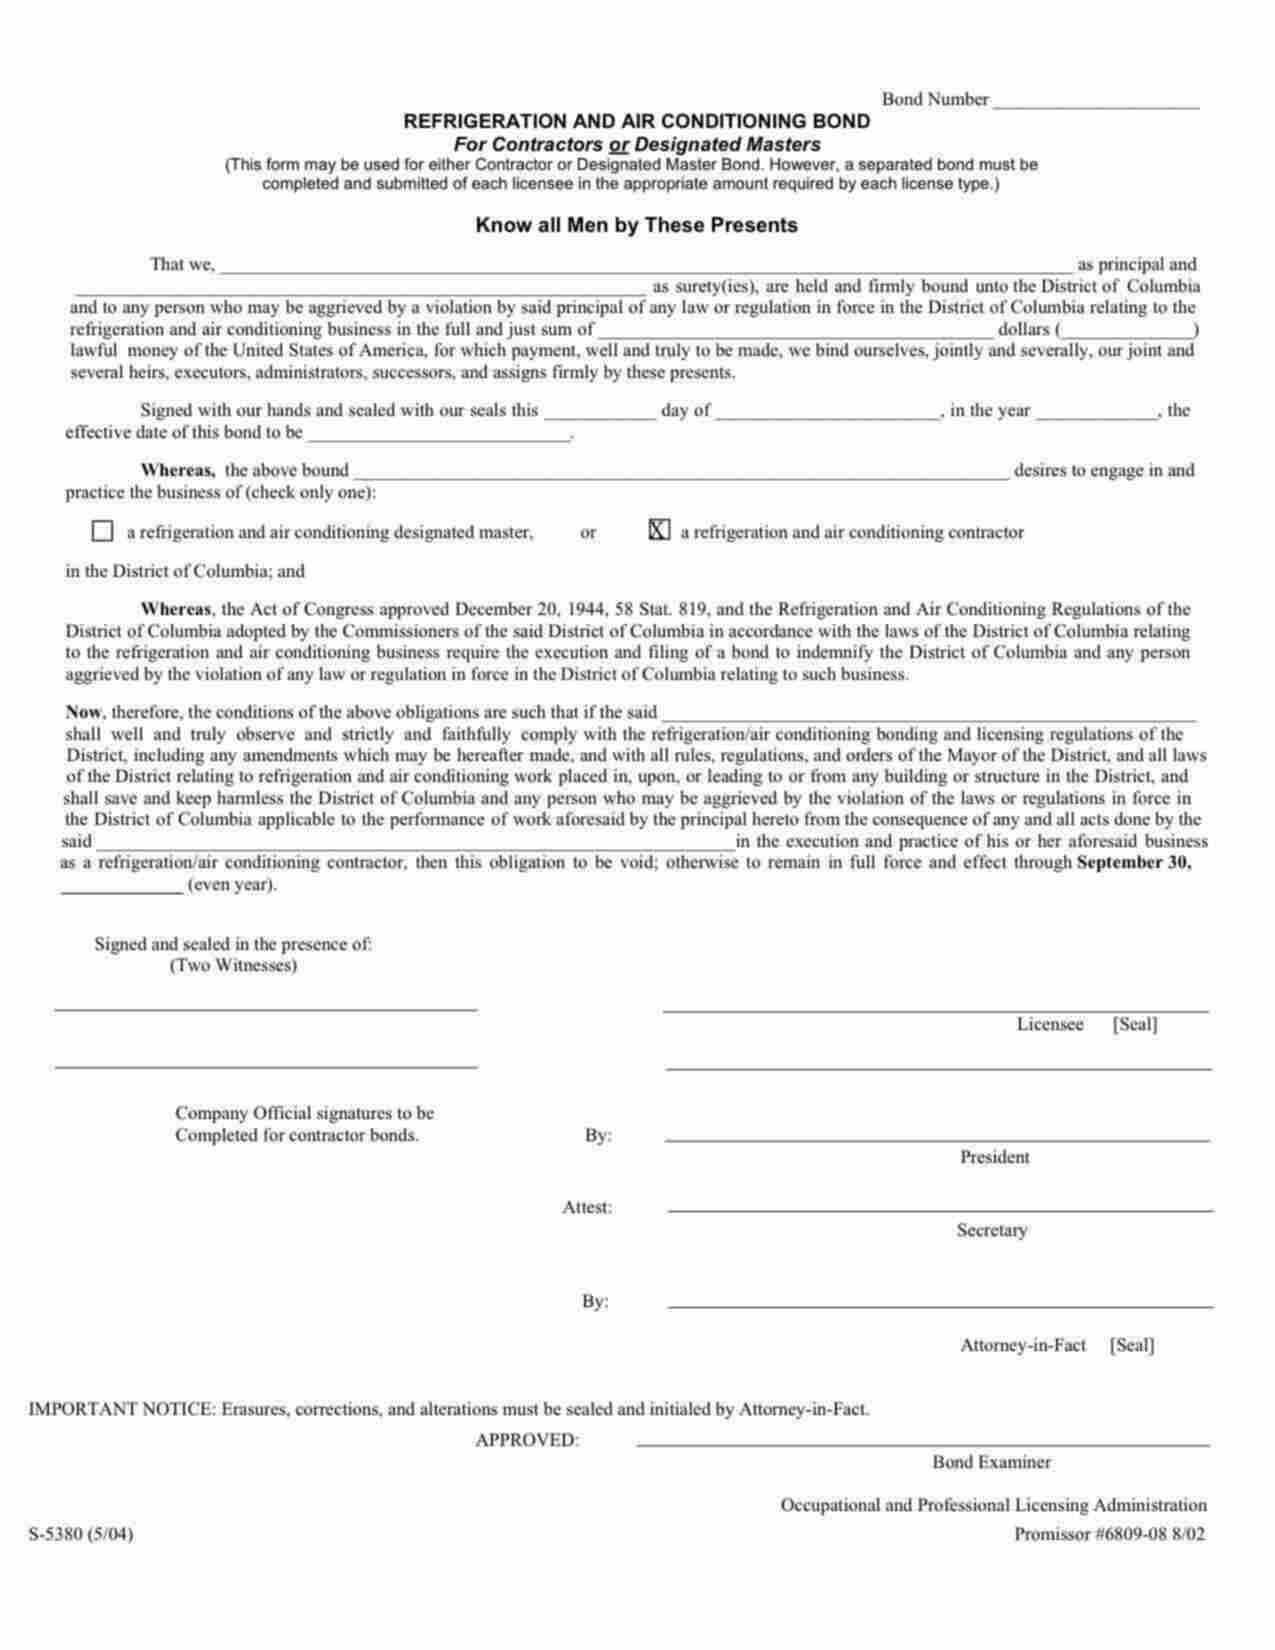 District of Columbia Refrigeration and Air Conditioning Contractor Bond Form